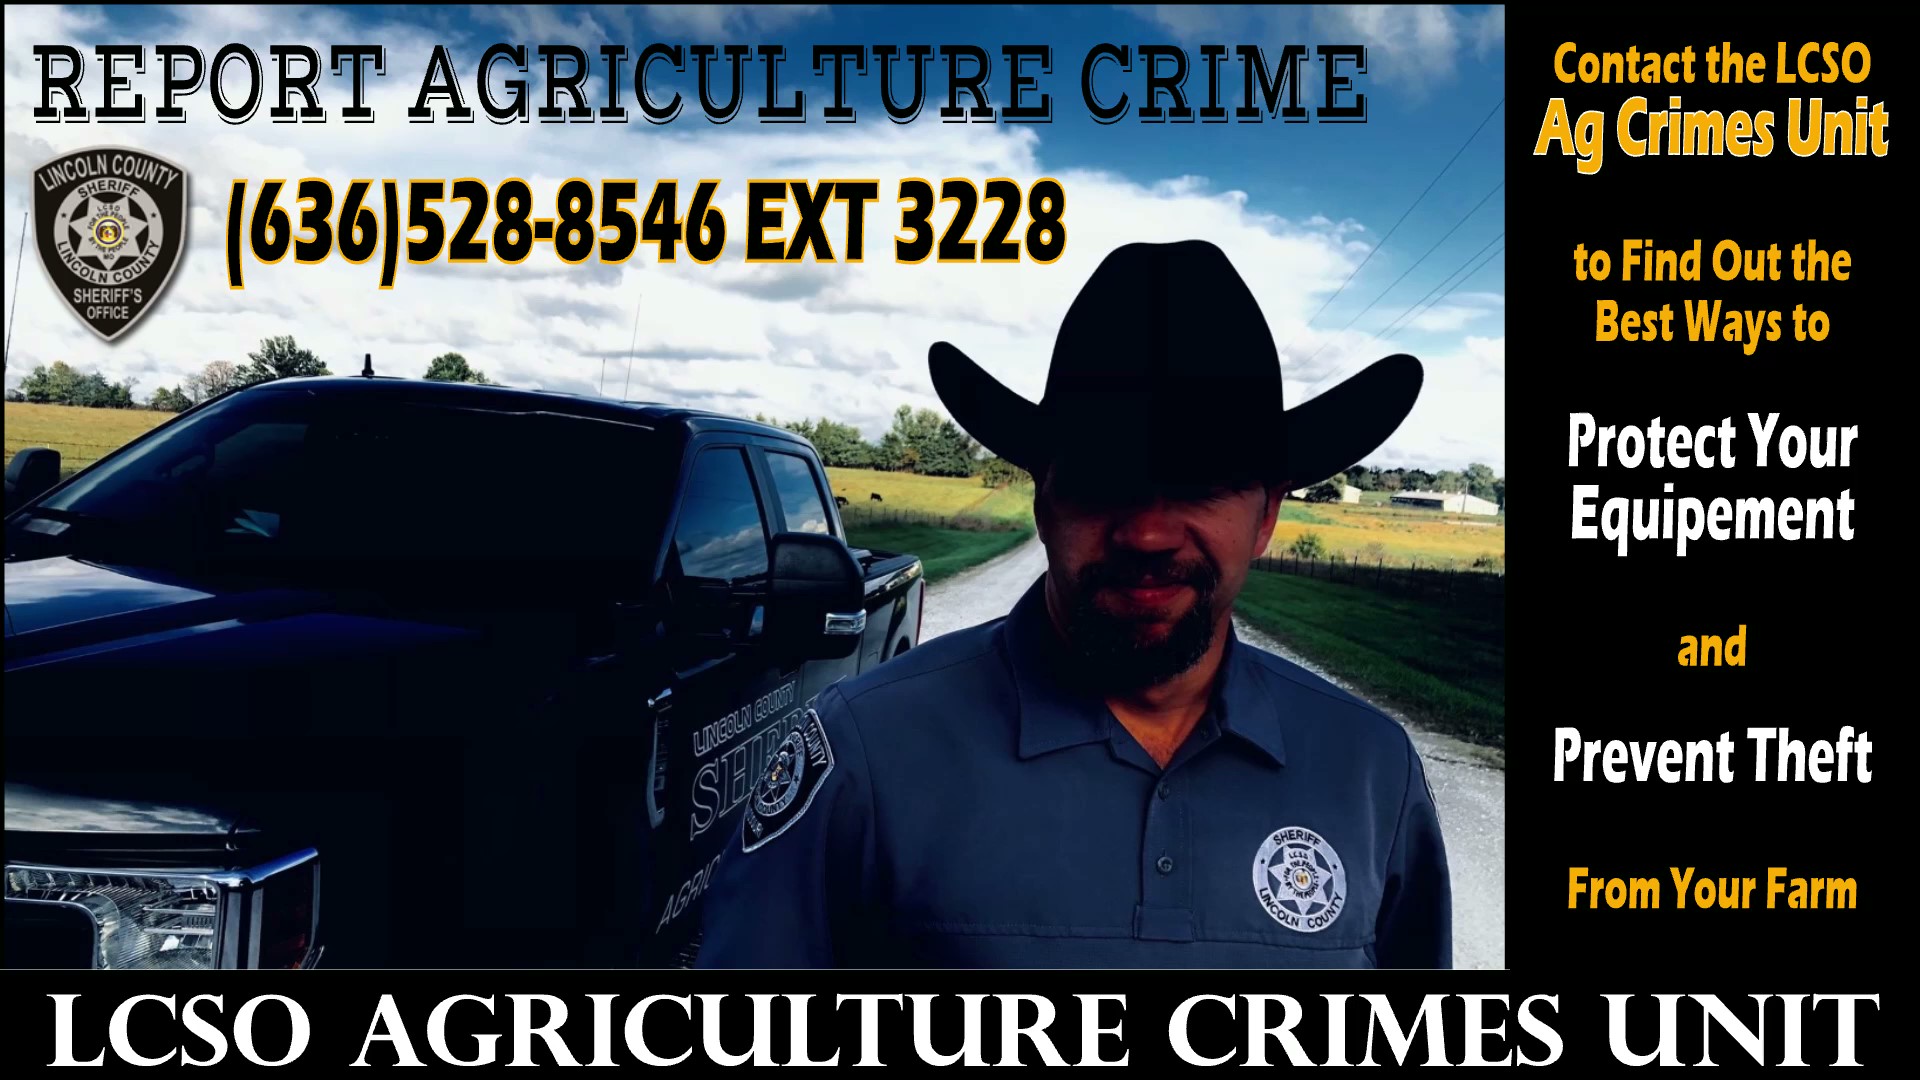 Report Agricultural Crime